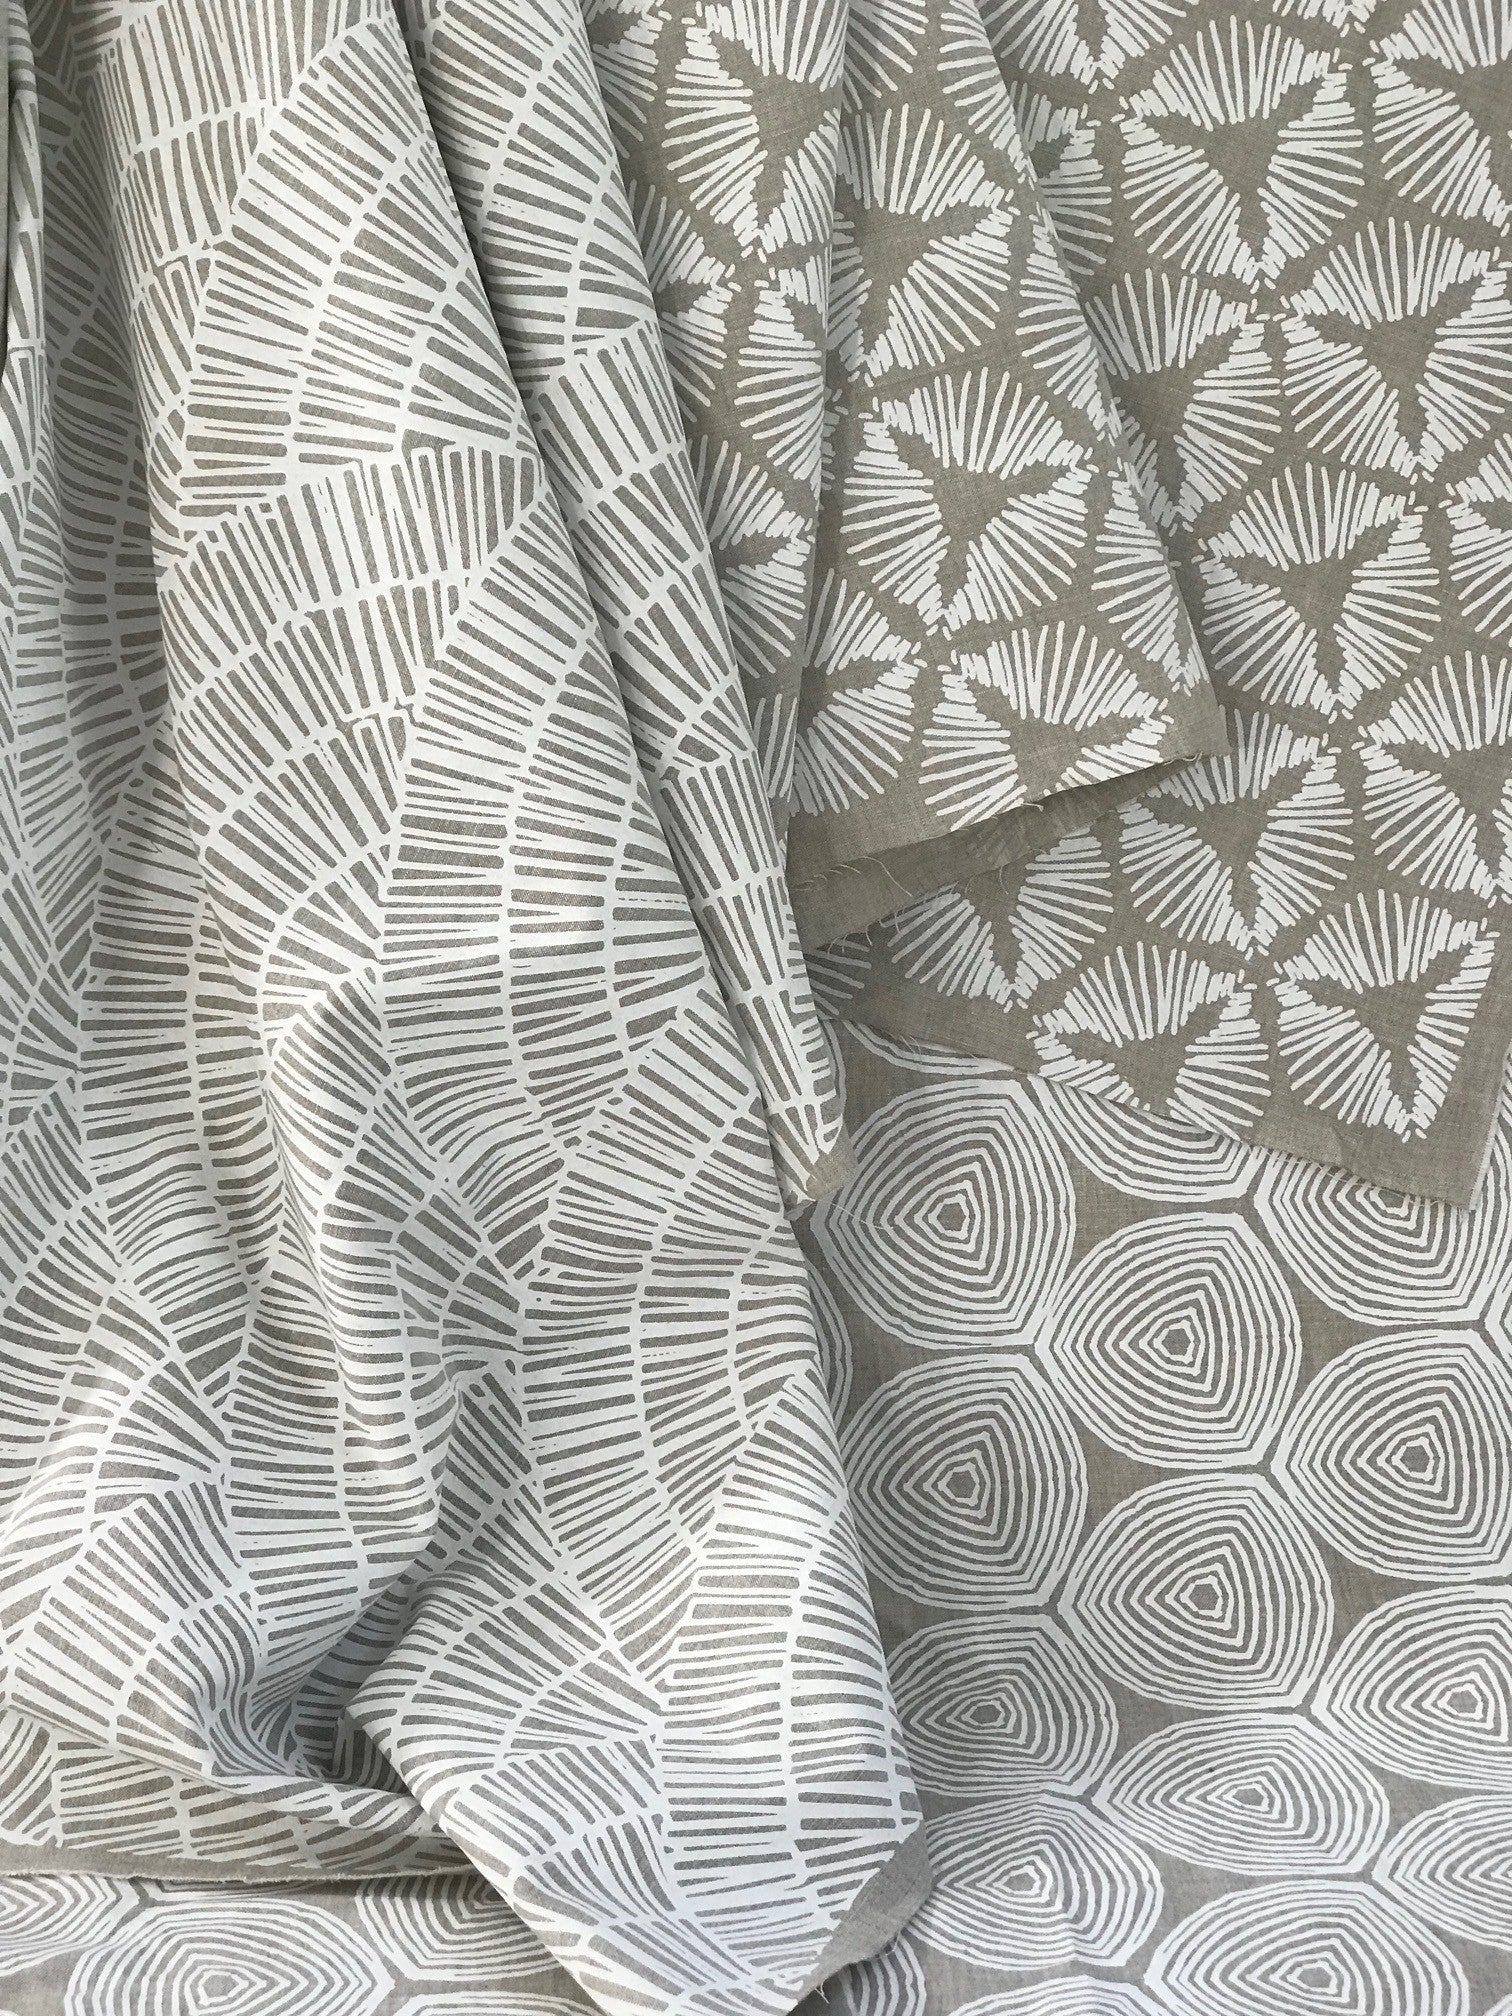 greige textiles fall release 2018 hand printed on Belgian Linen fabric in California